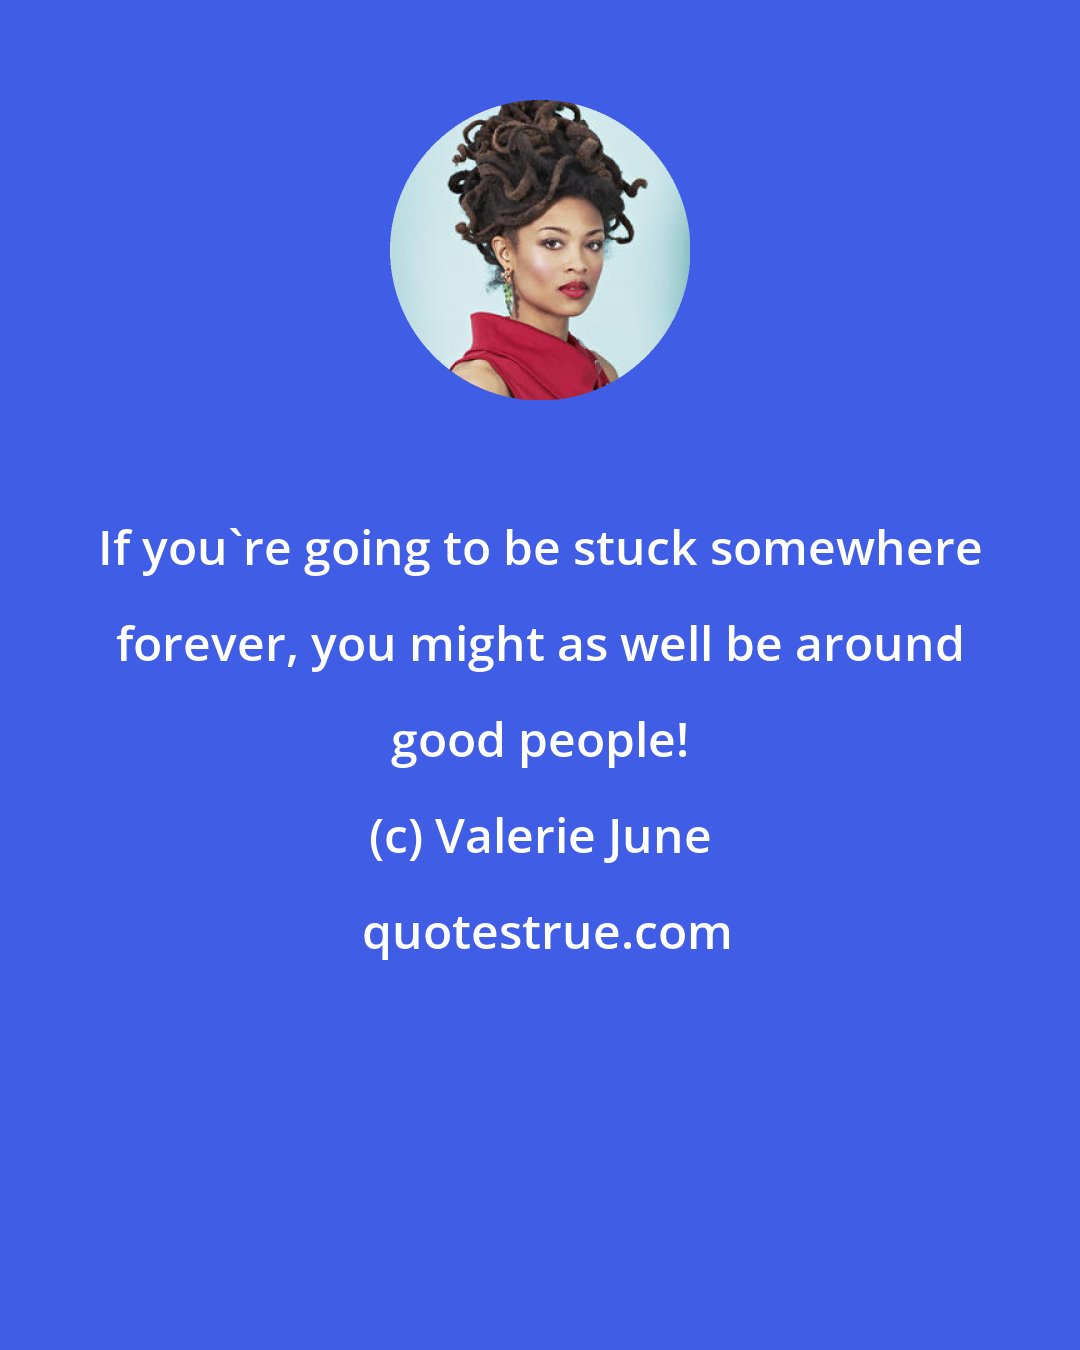 Valerie June: If you're going to be stuck somewhere forever, you might as well be around good people!